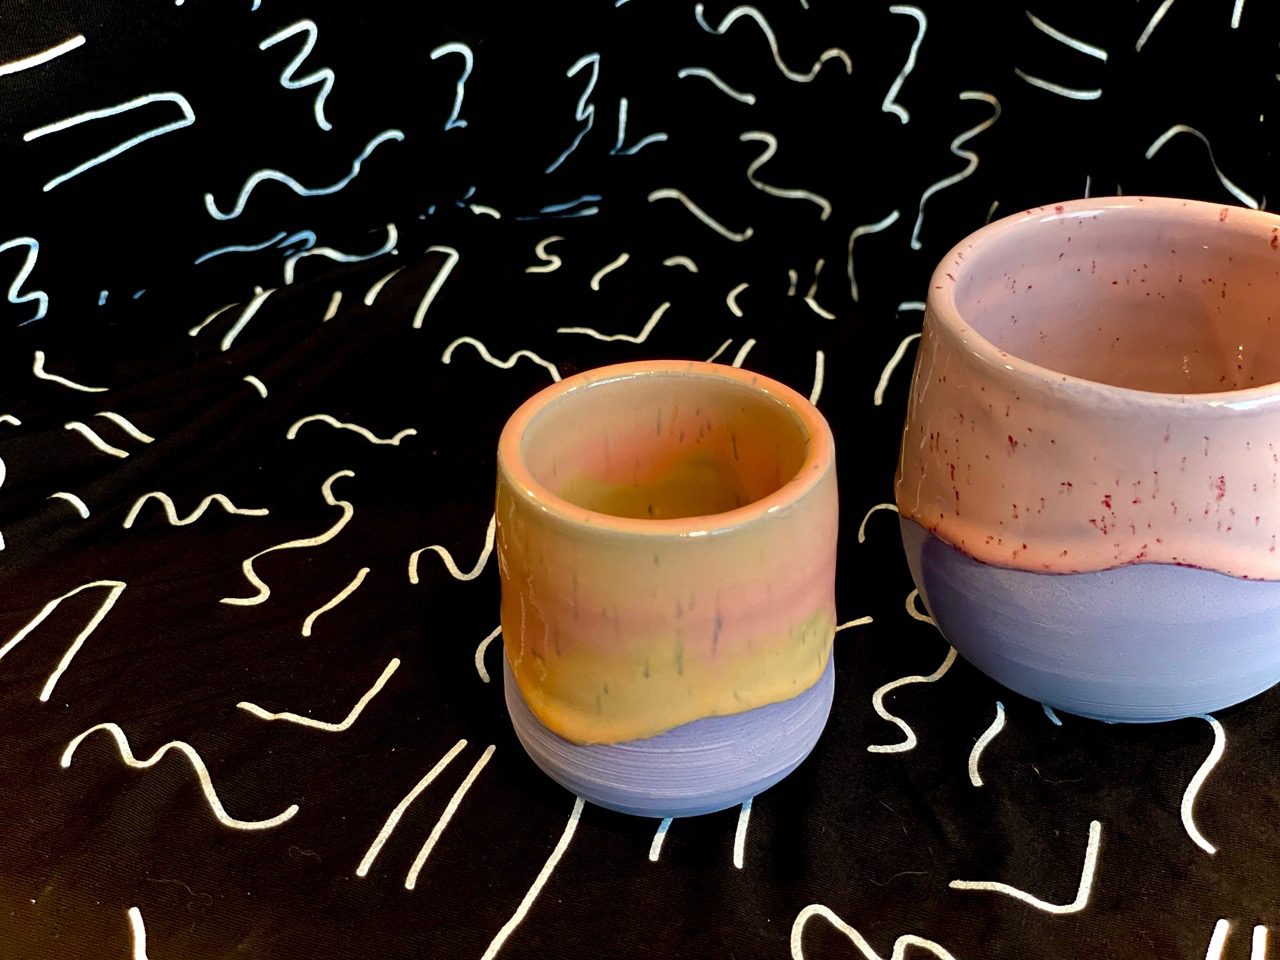 Purple porcelain cups with yellow and pink glazes